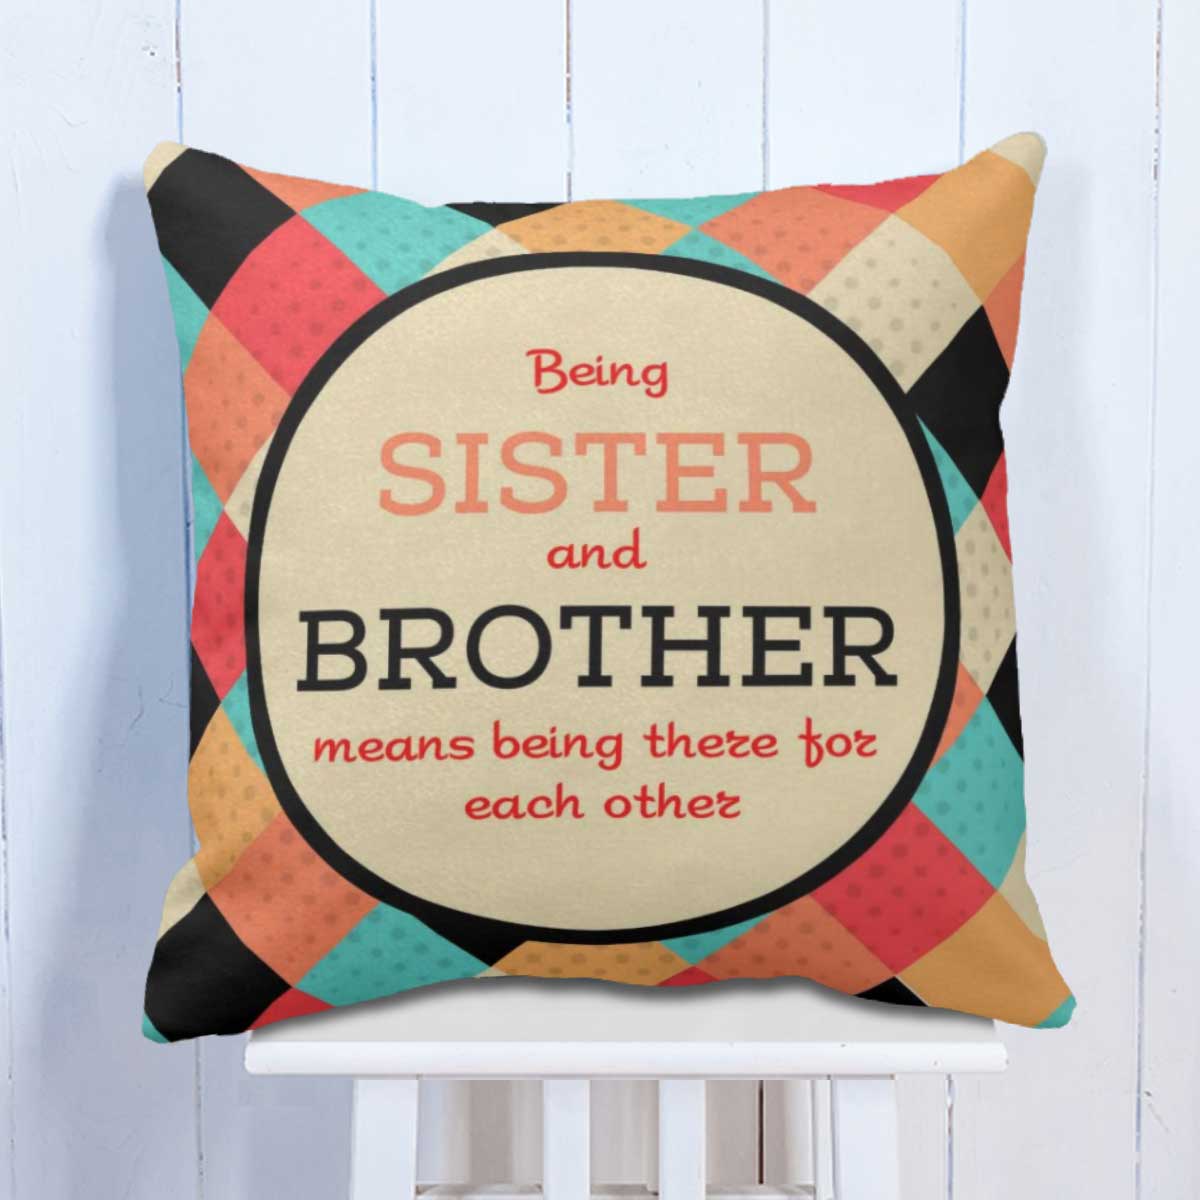 Being Sister and Brother Means Cushion